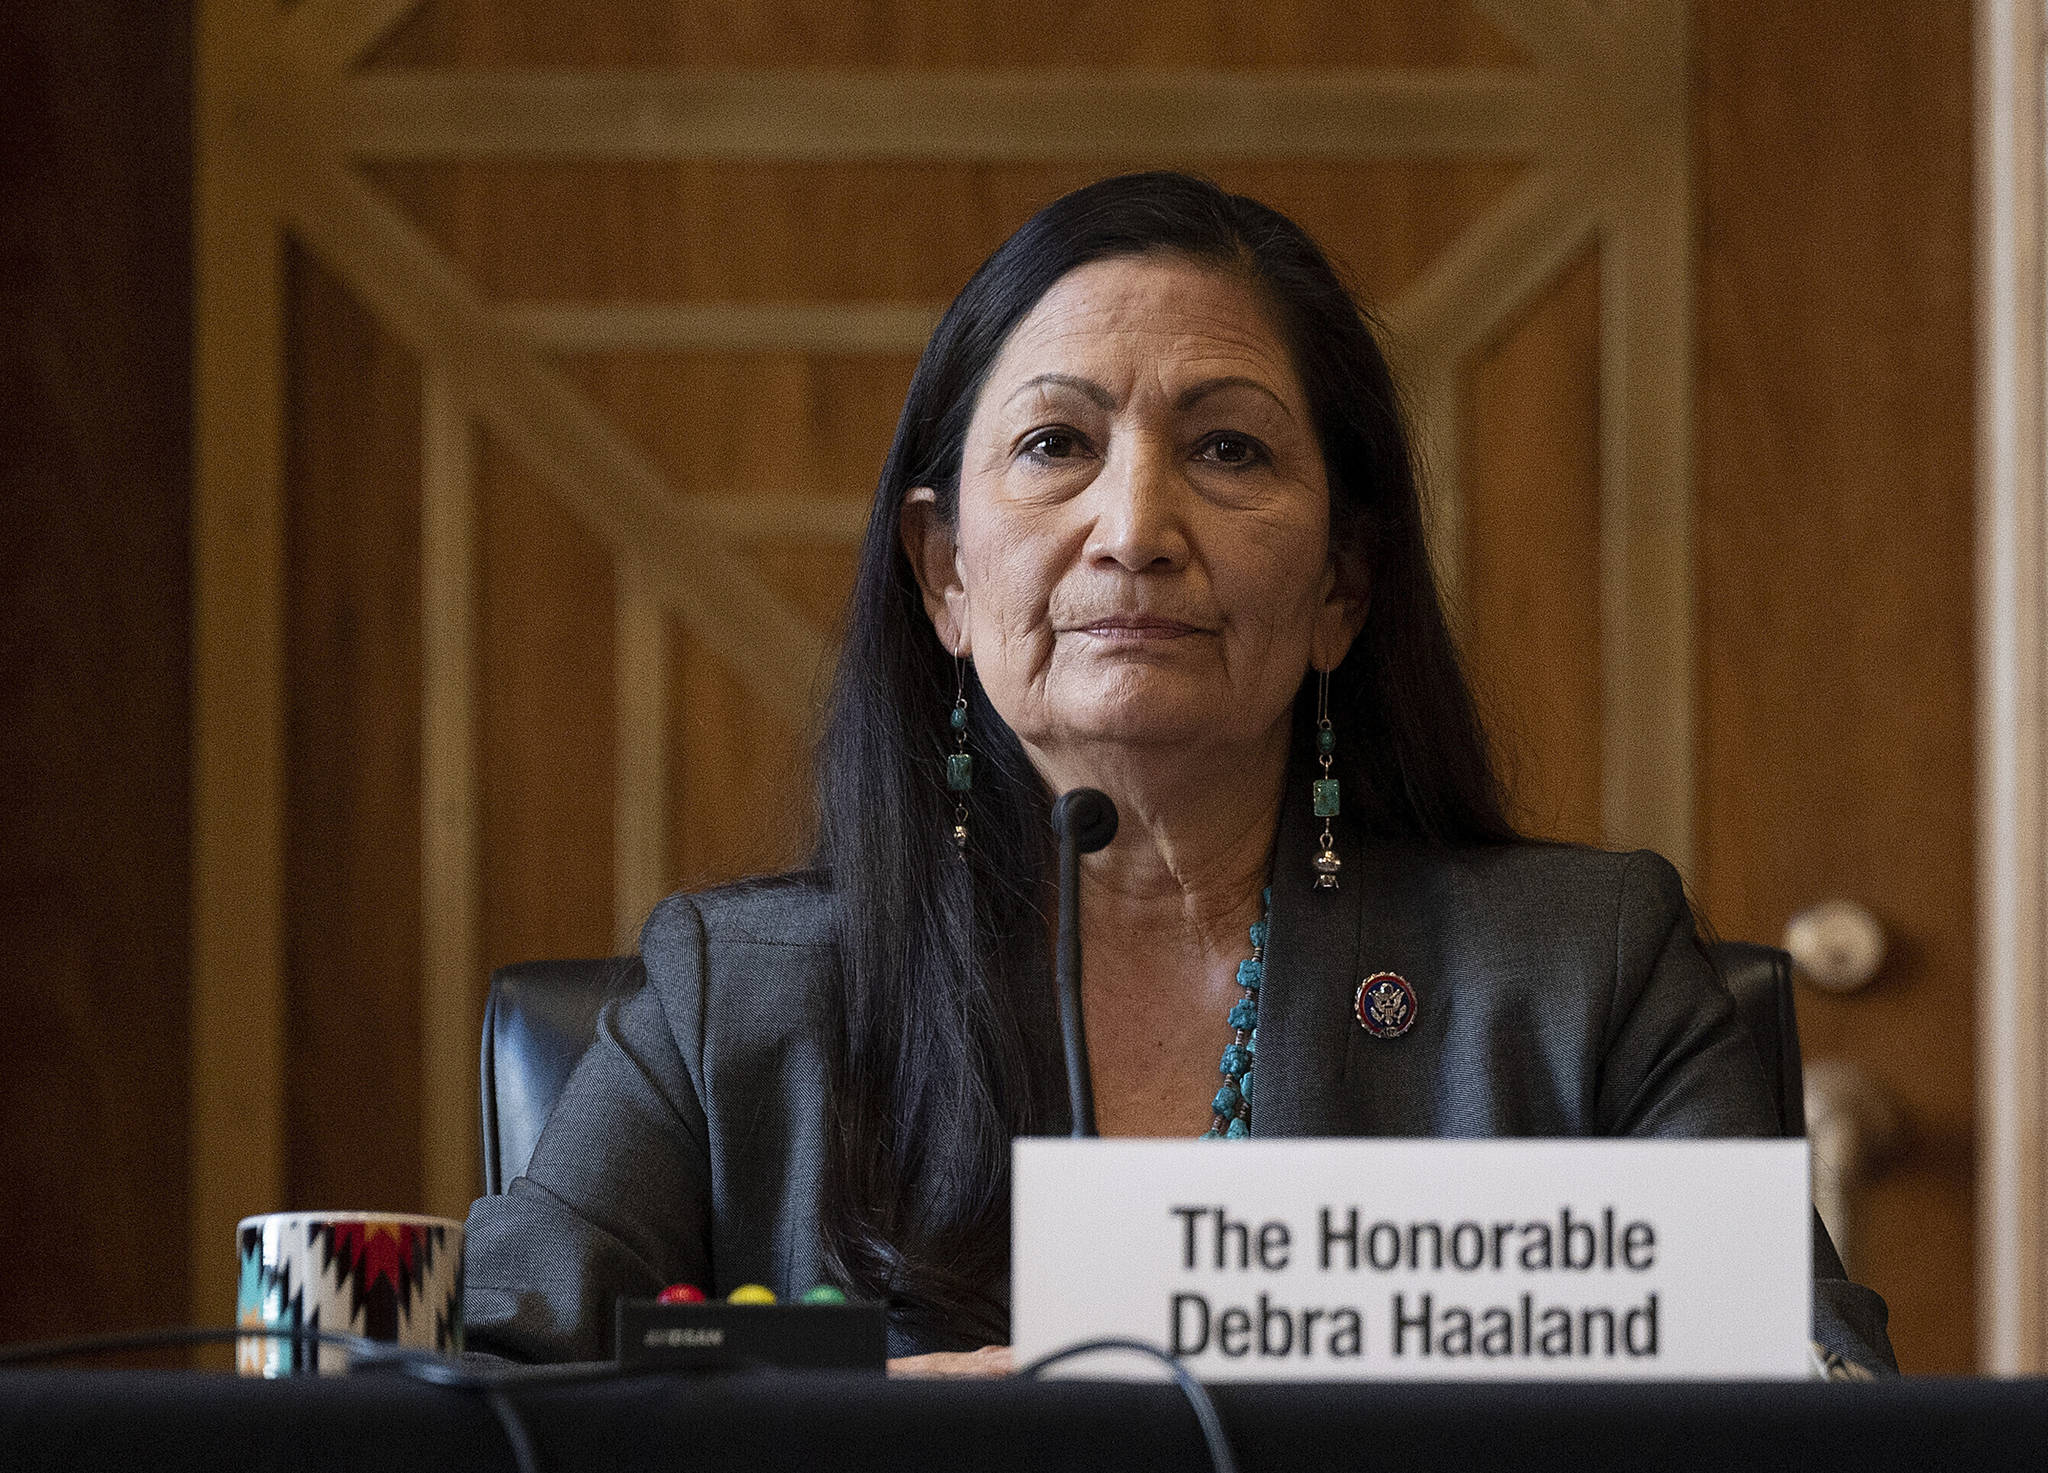 Rep. Deb Haaland, D-N.M., listens during the Senate Committee on Energy and Natural Resources hearing on her nomination to be Interior secretary, on Capitol Hill in Washington. Some Republican senators labeled Haaland “radical” over her calls to reduce dependence on fossil fuels and address climate change, and said that could hurt rural America and major oil and gas-producing states. The label of Haaland as a “radical” by Republican lawmakers is getting pushback from Native Americans. (Jim Watson / Pool Photo)